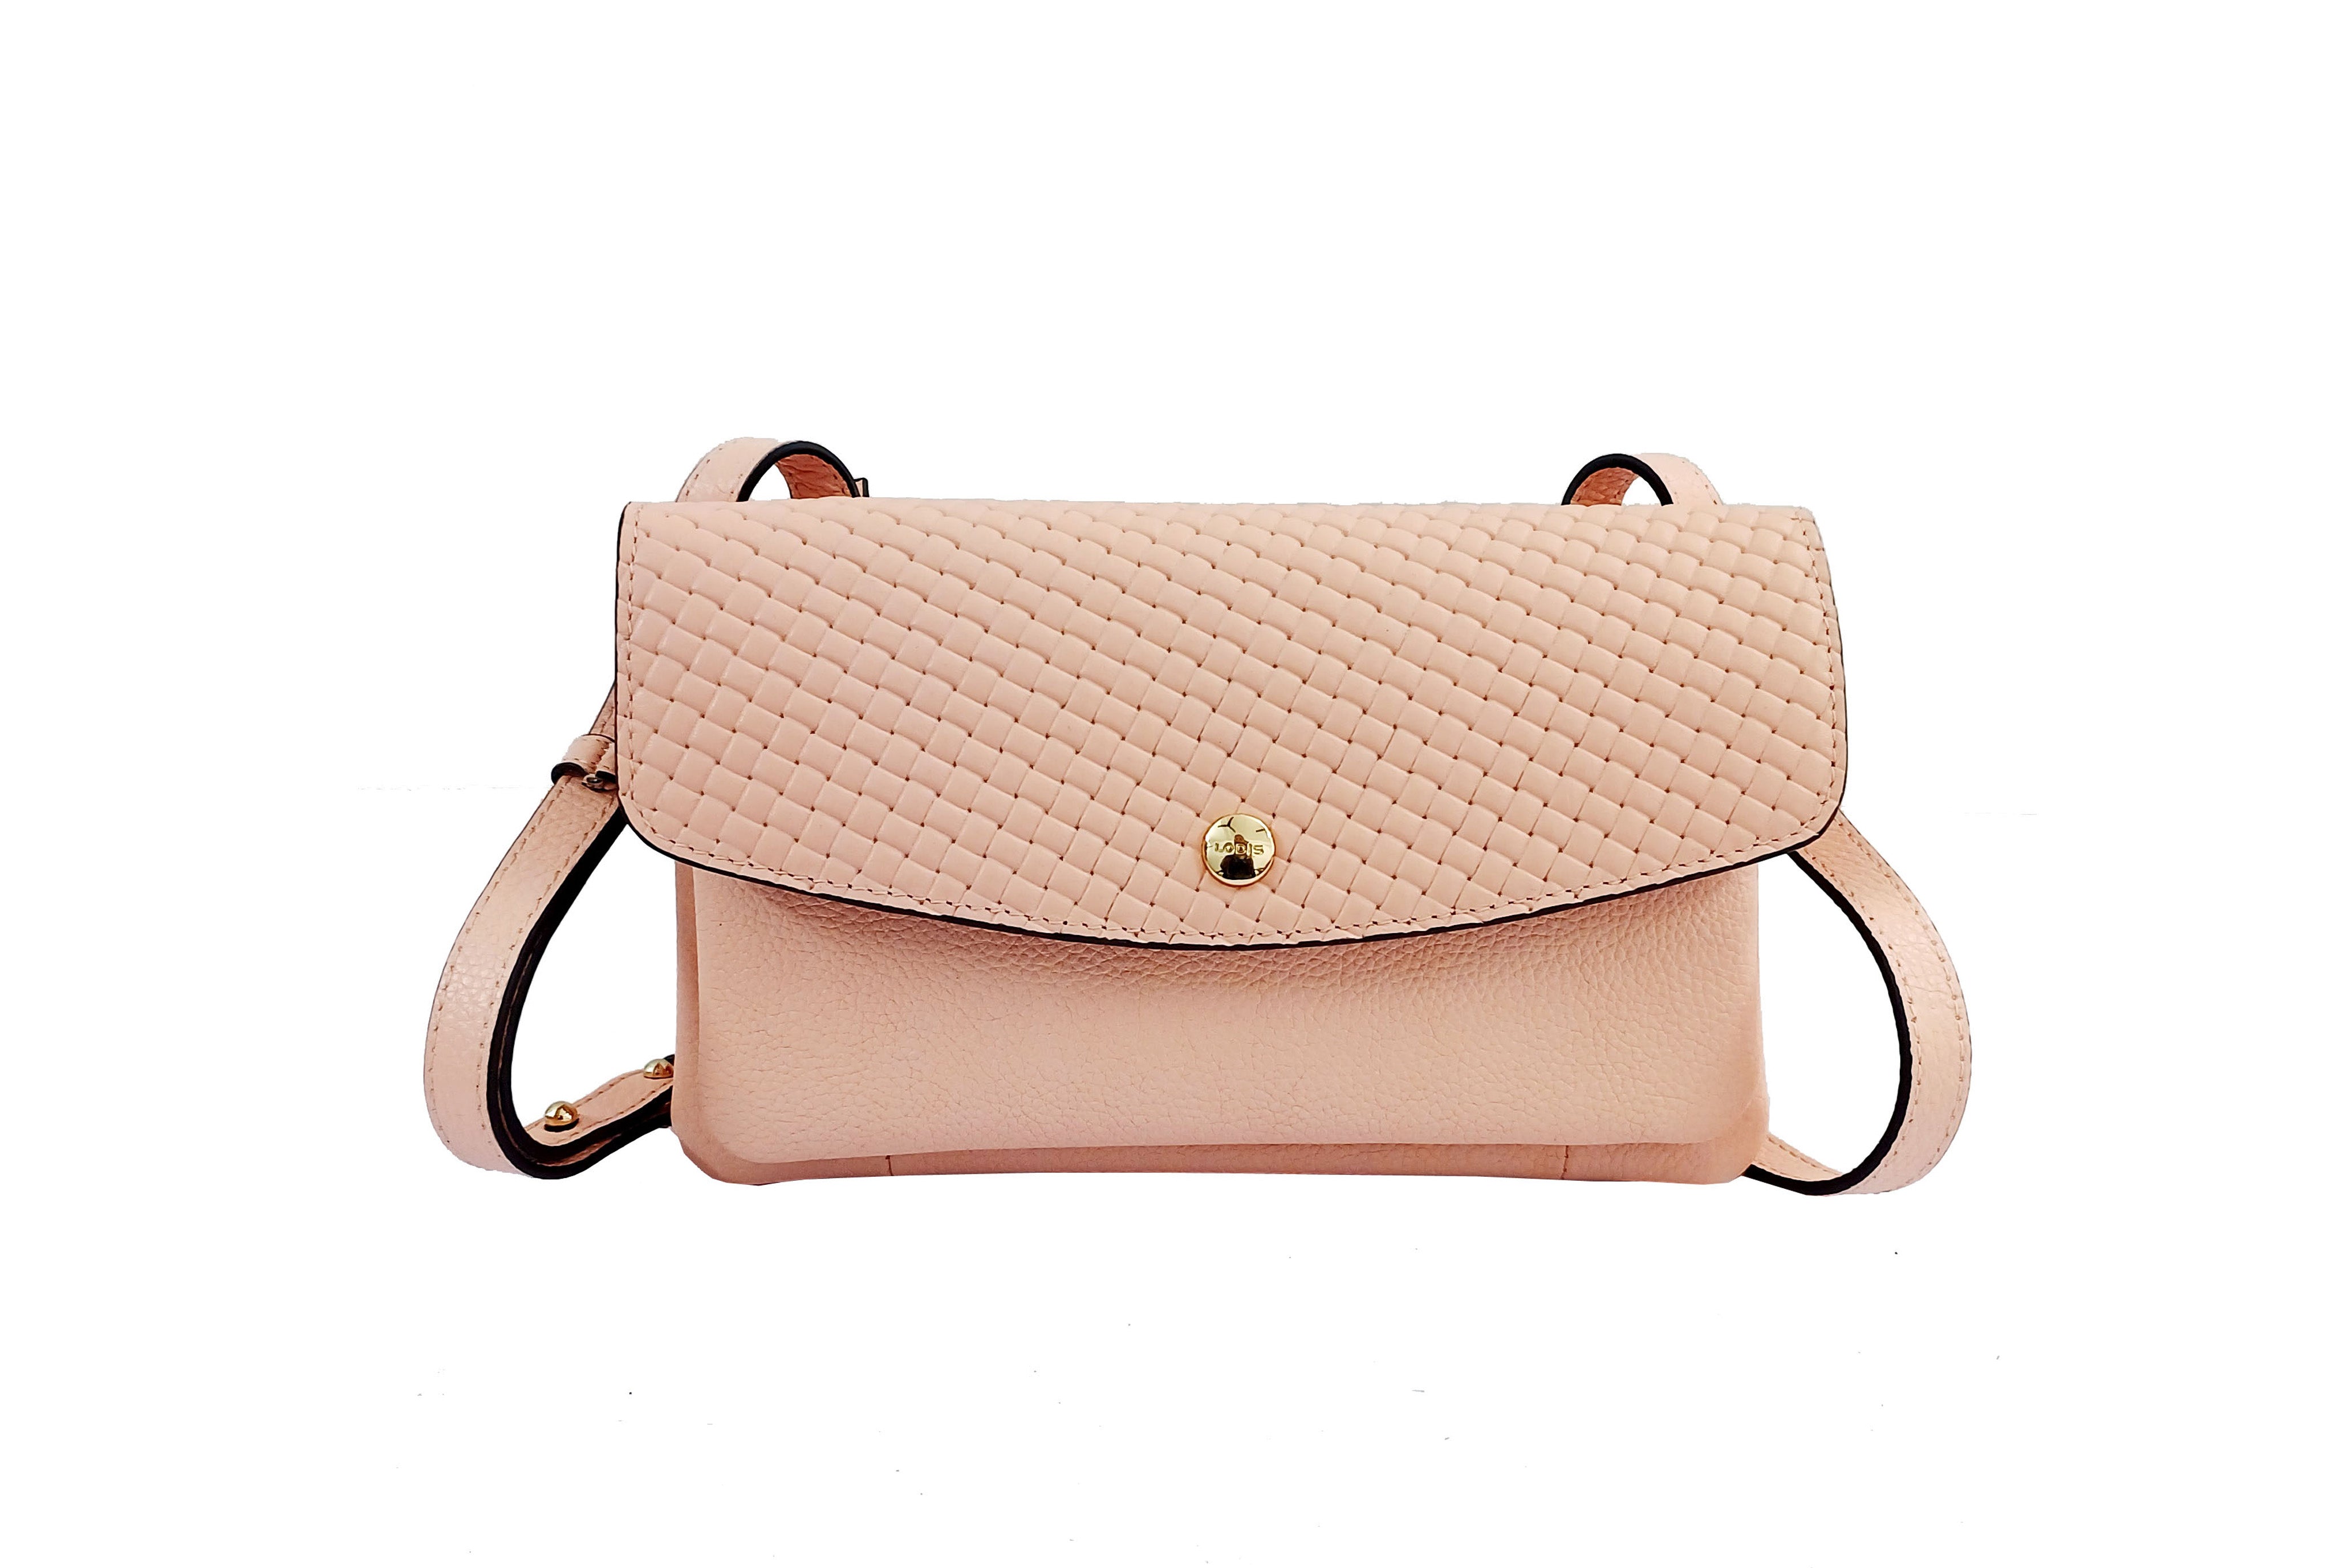 Shop Now&Upraise your style with the chic bloom mini crossbody | Lodis